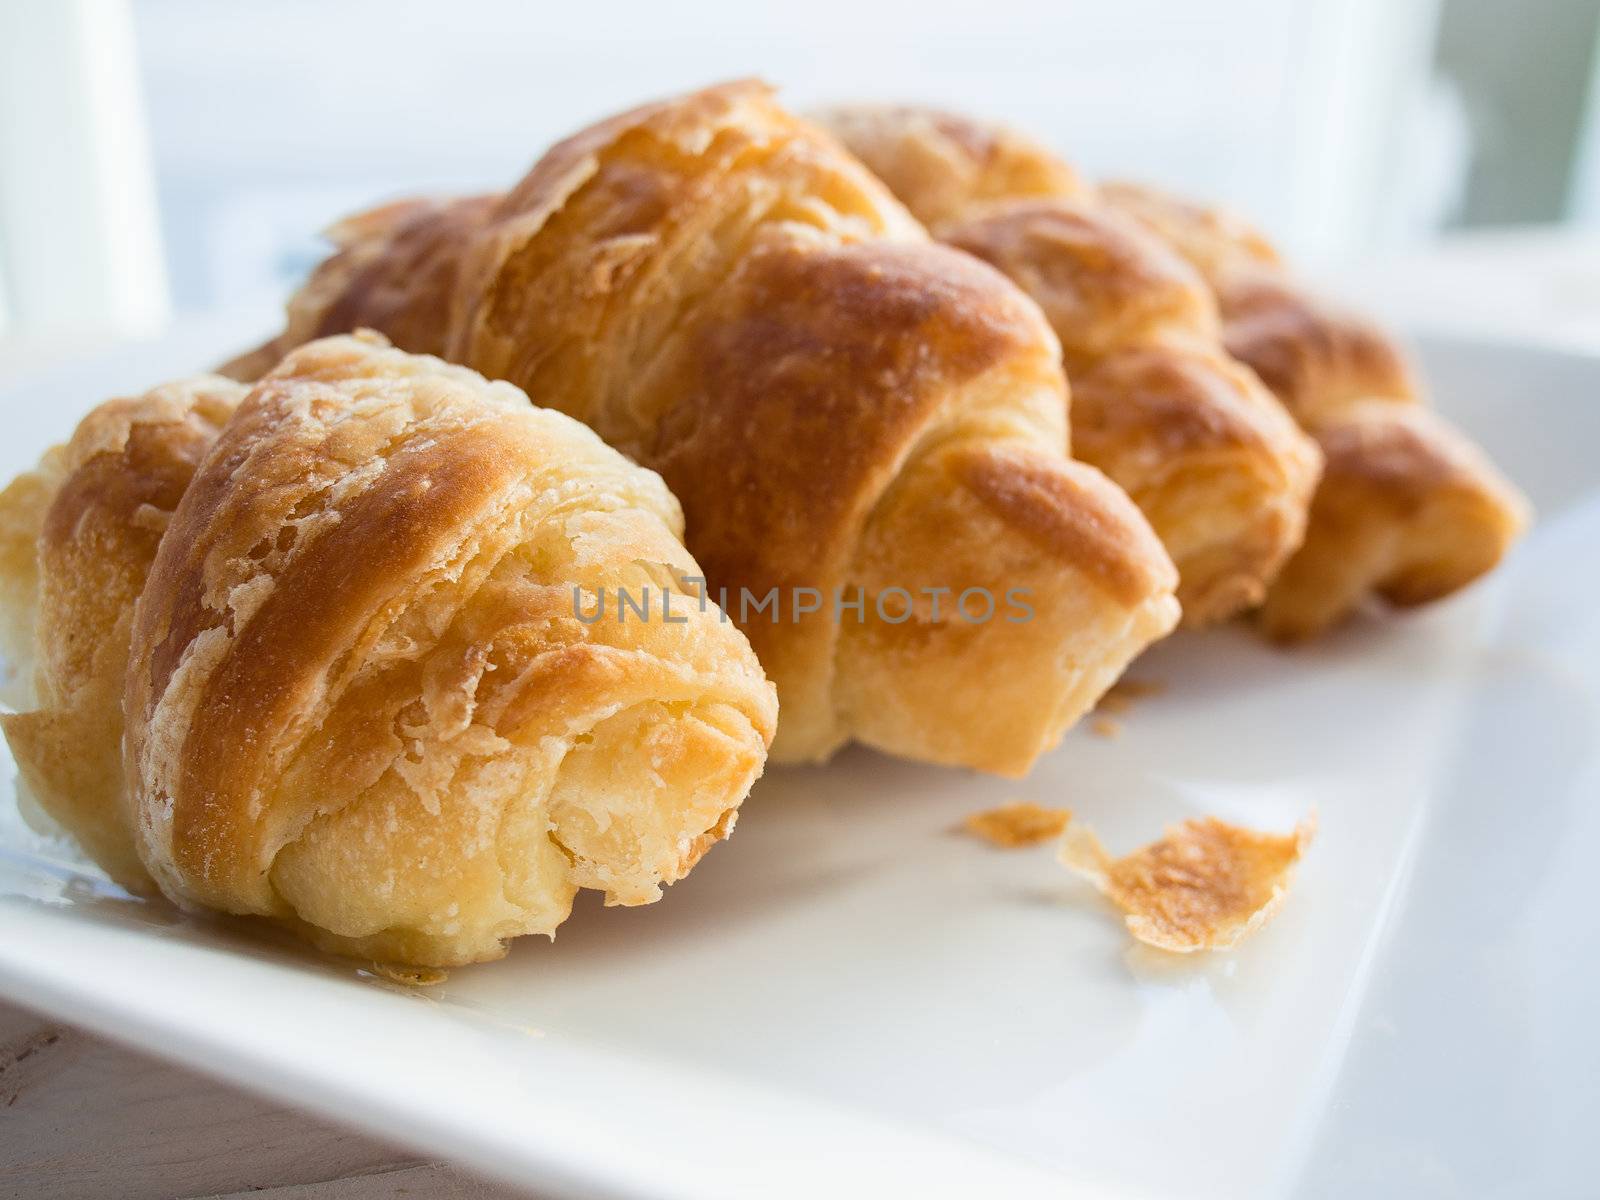 Butter croissant by Talanis